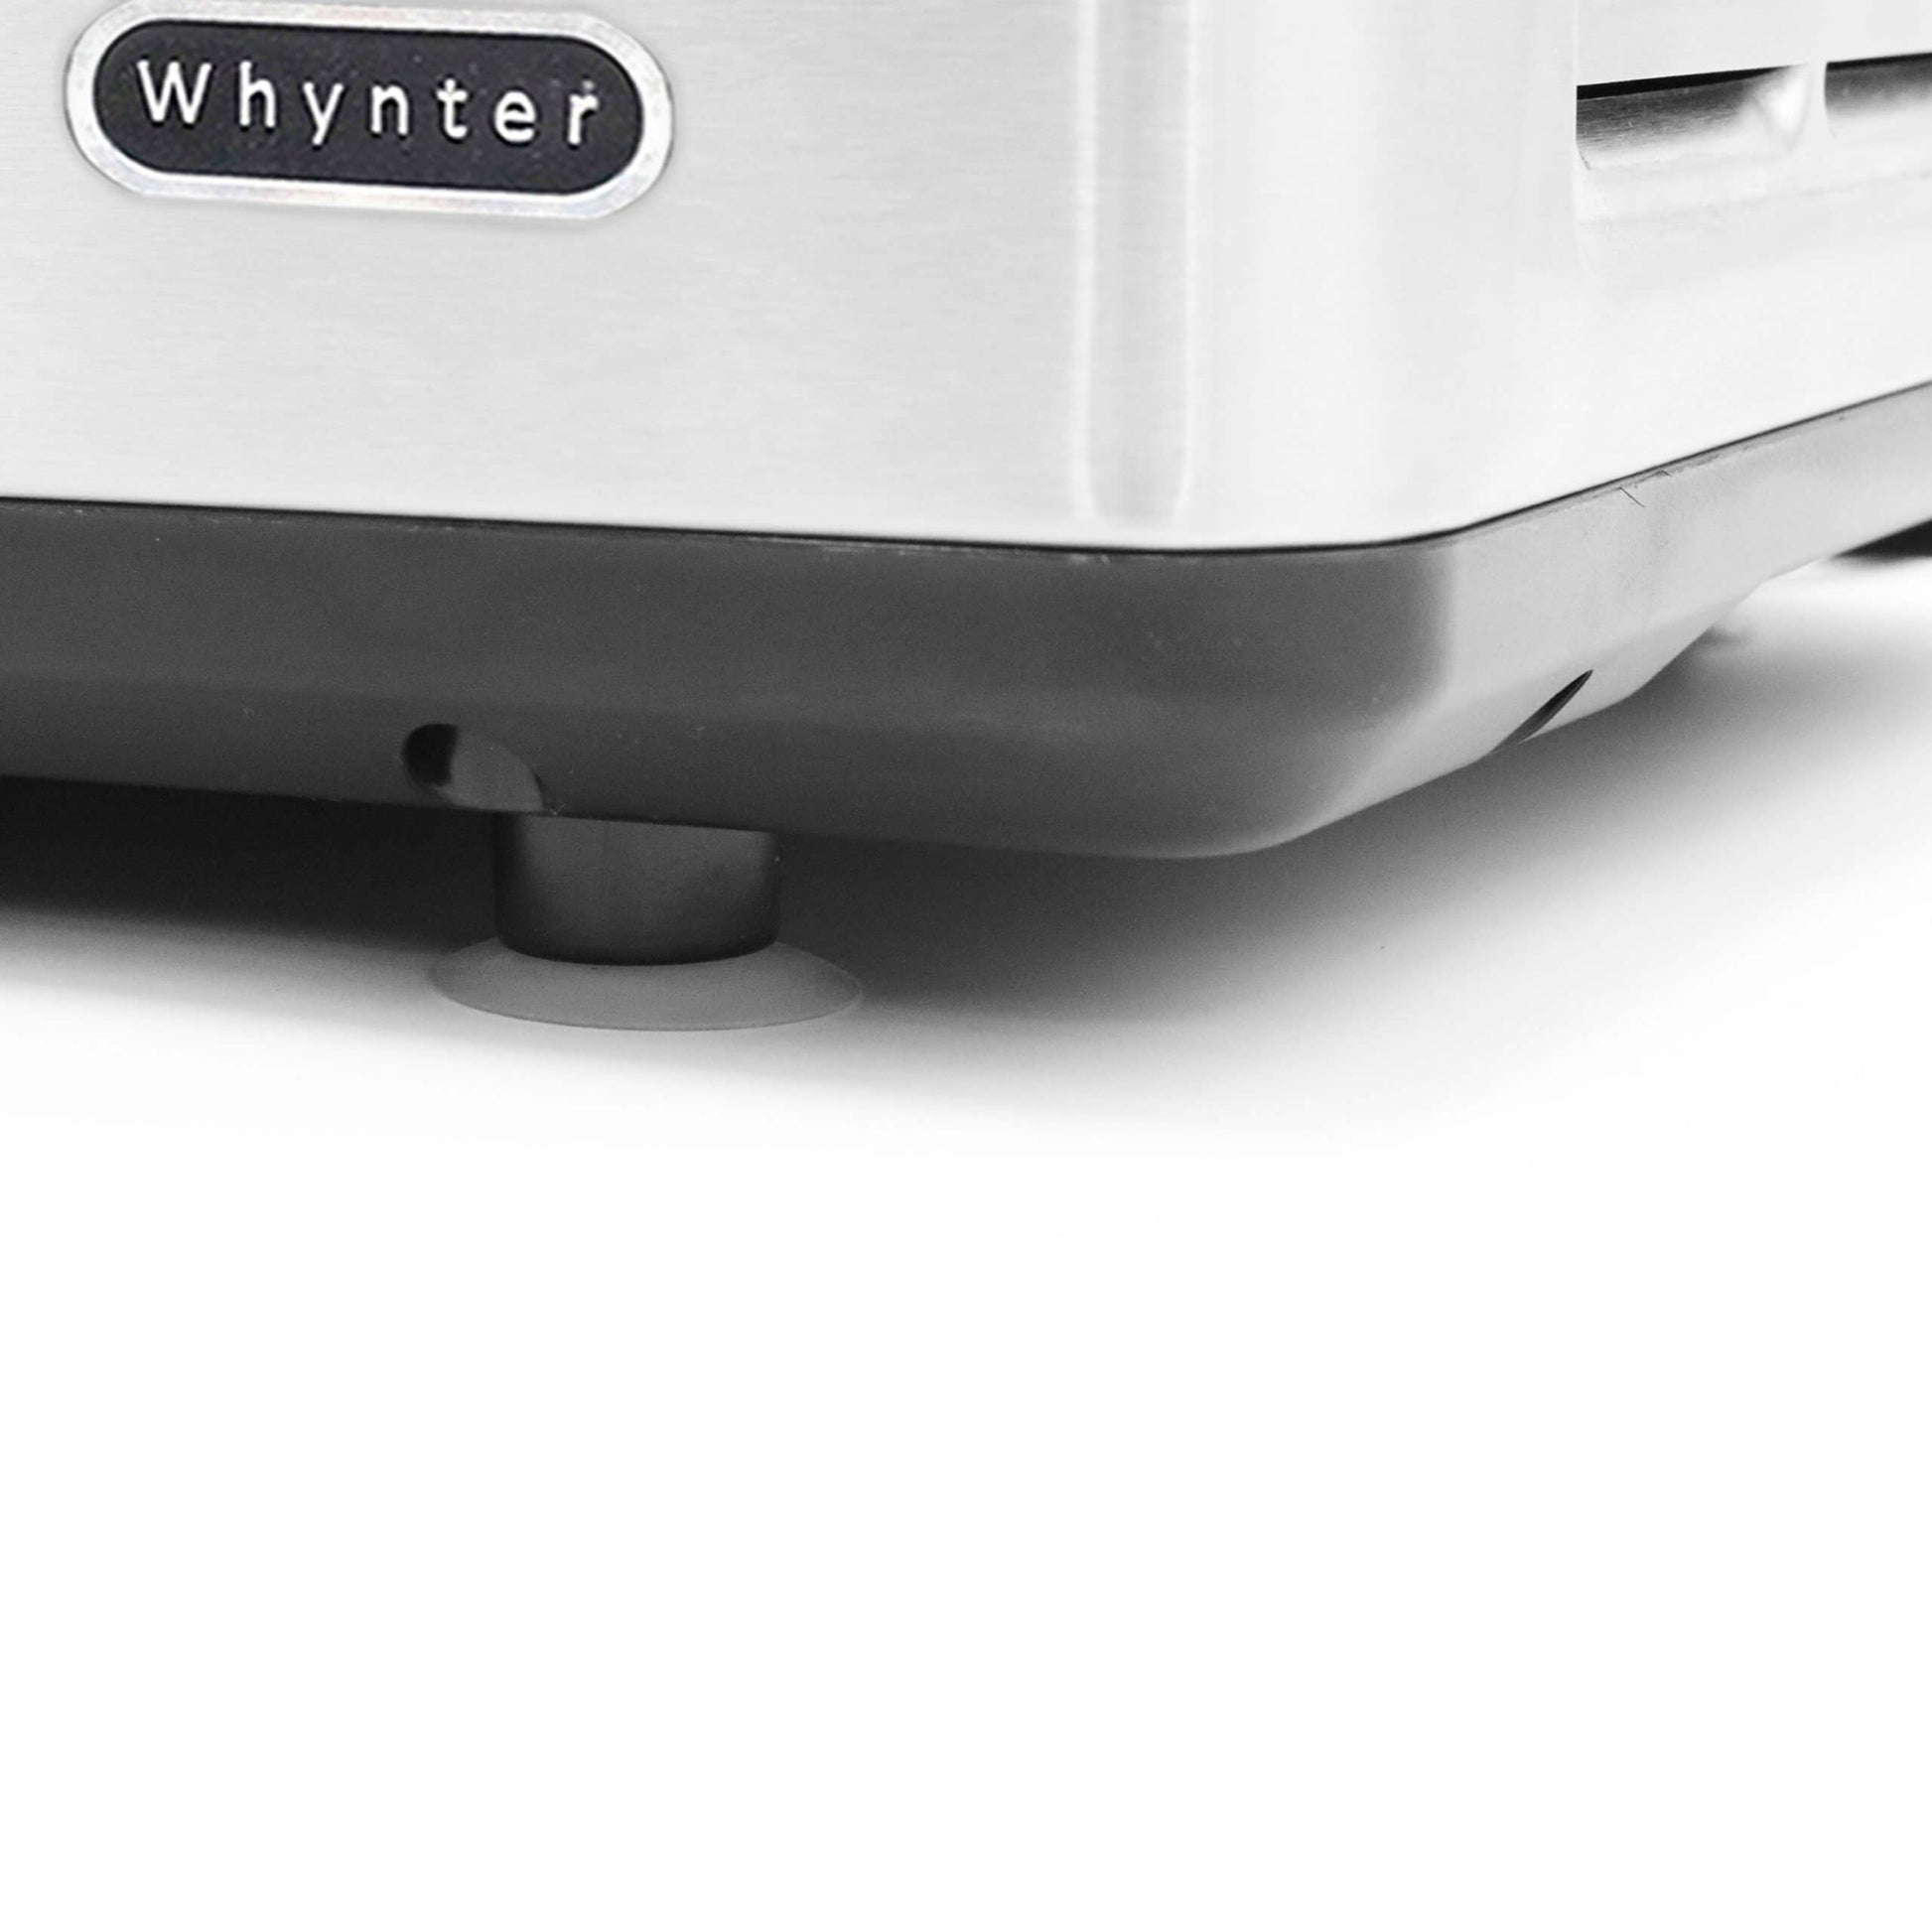 Whynter Ice Cream Makers Whynter ICR-300SS Portable Instant Automatic Compressor Ice Cream Maker Frozen Pan Roller in Stainless Steel